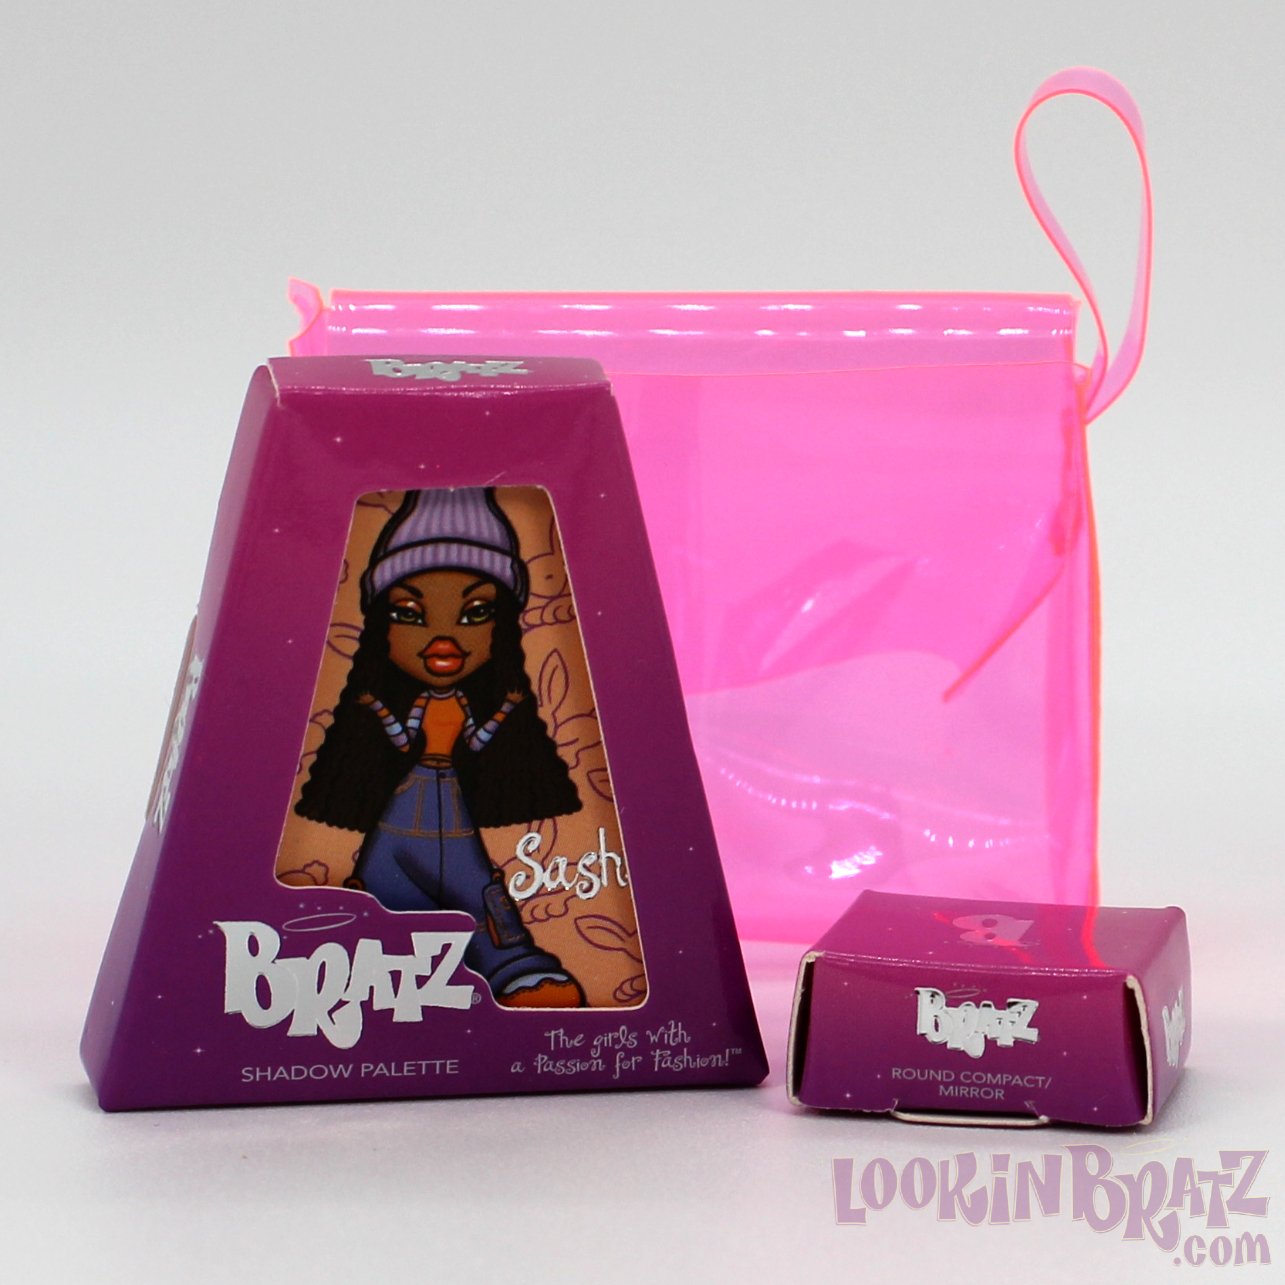 Mini Bratz Cosmetics First Edition Sasha Shadow Palette and Round Compact Mirror (Packaging)